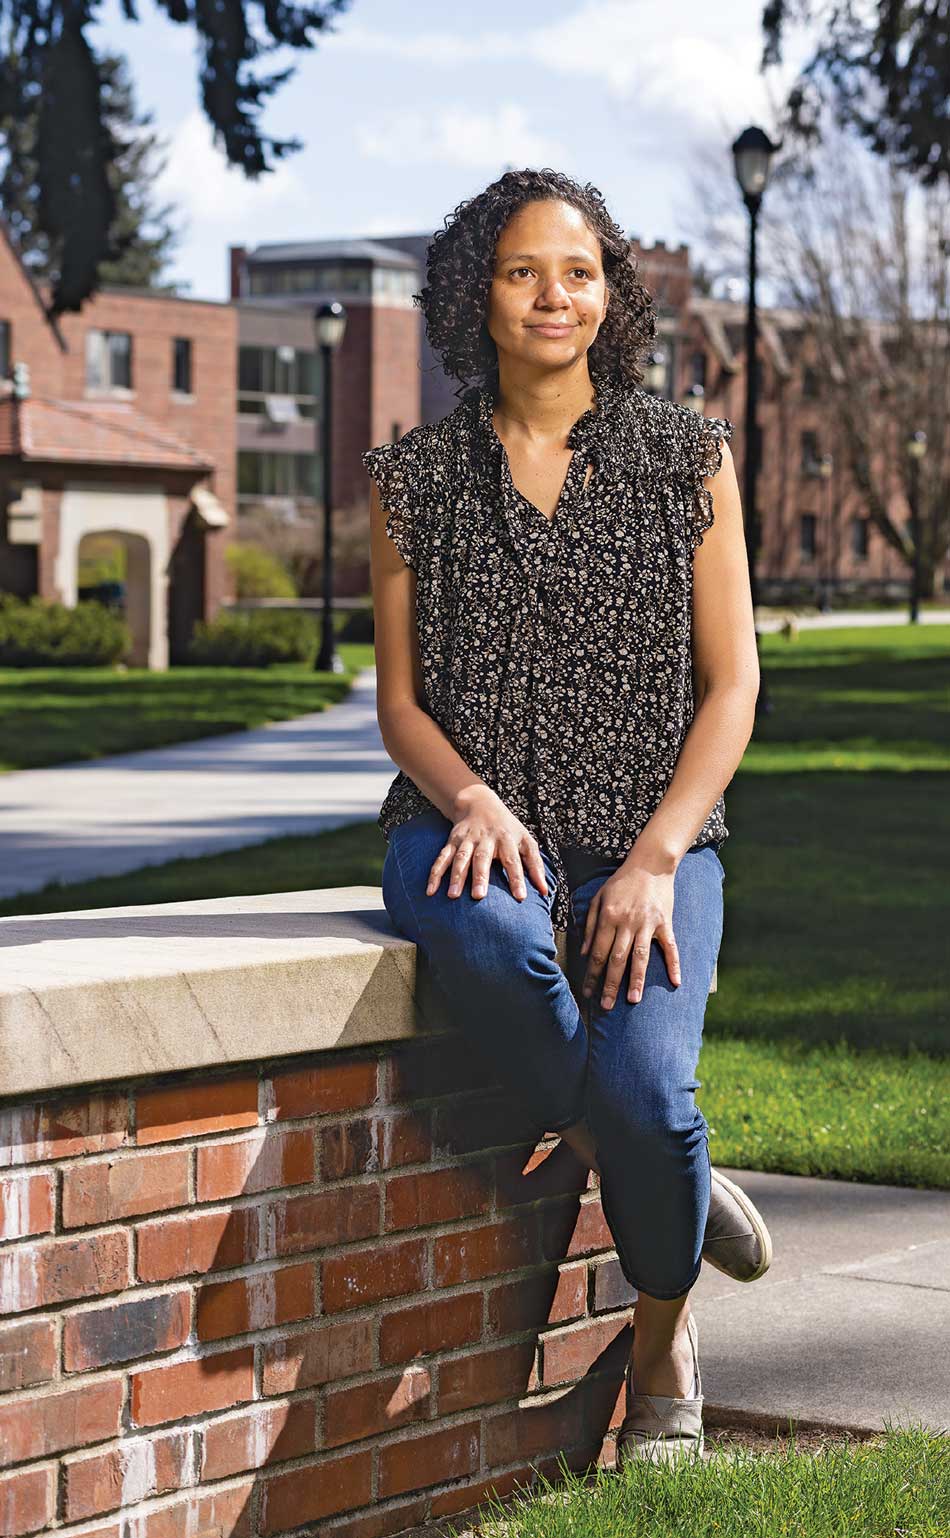 America Chambers poses sitting on a brick half-wall, wearing a black and white floral shirt and jeans. She appears to be on a college campus.